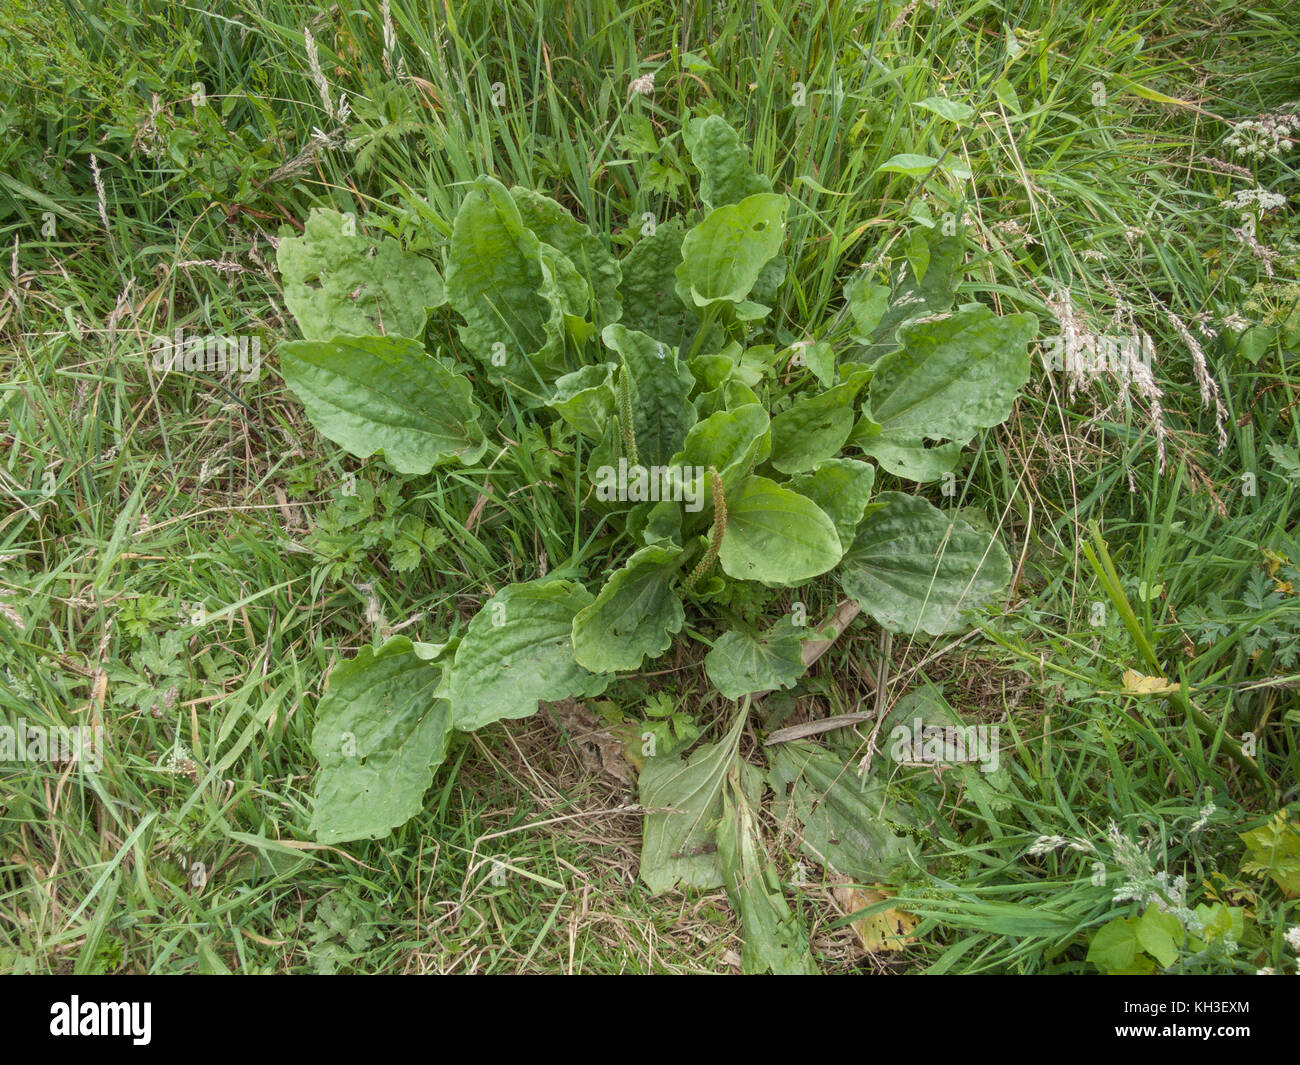 Mid-season foliage of Greater Plantain / Plantago major. The cooked leaves may be used as survival food, while the plant was used in herbal medicine. Stock Photo